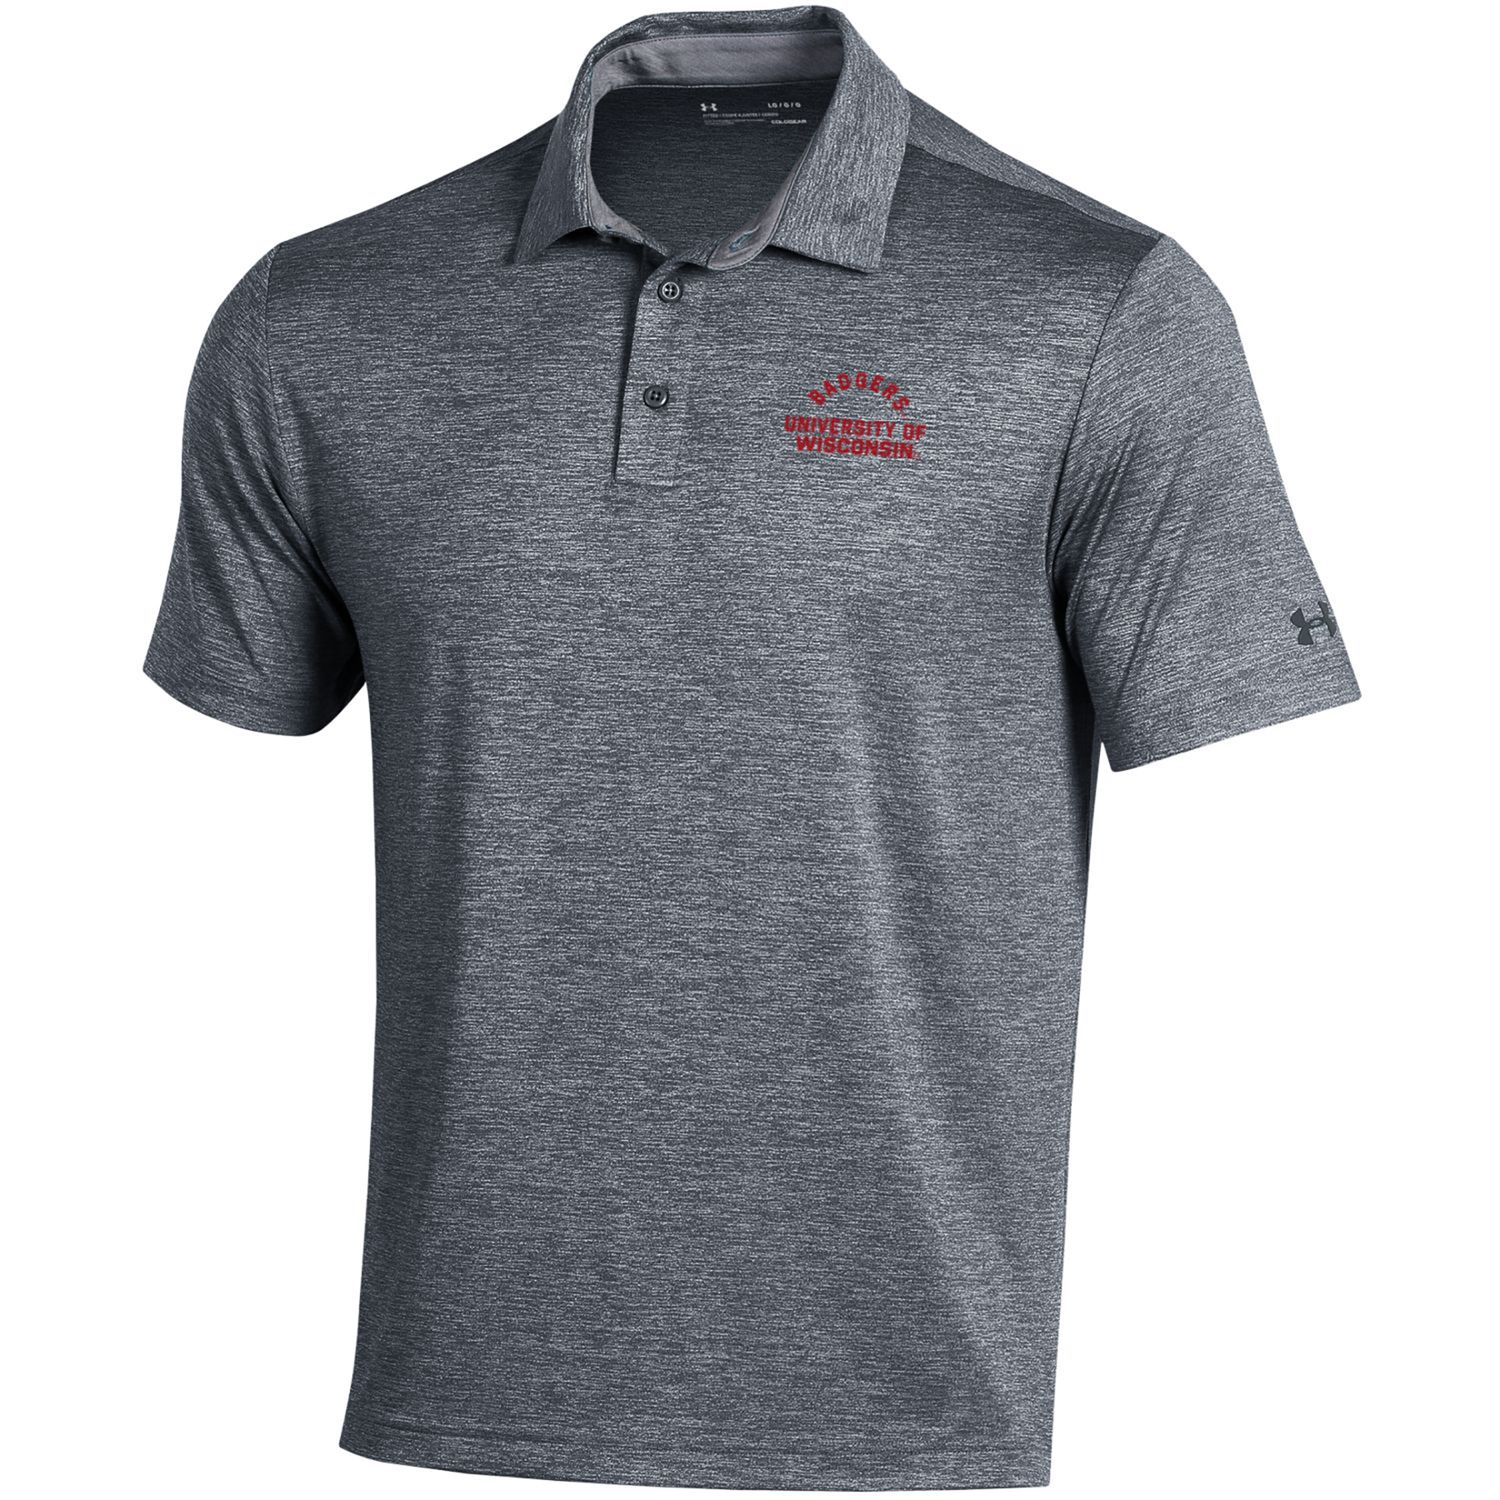 kohl's under armour polo shirts